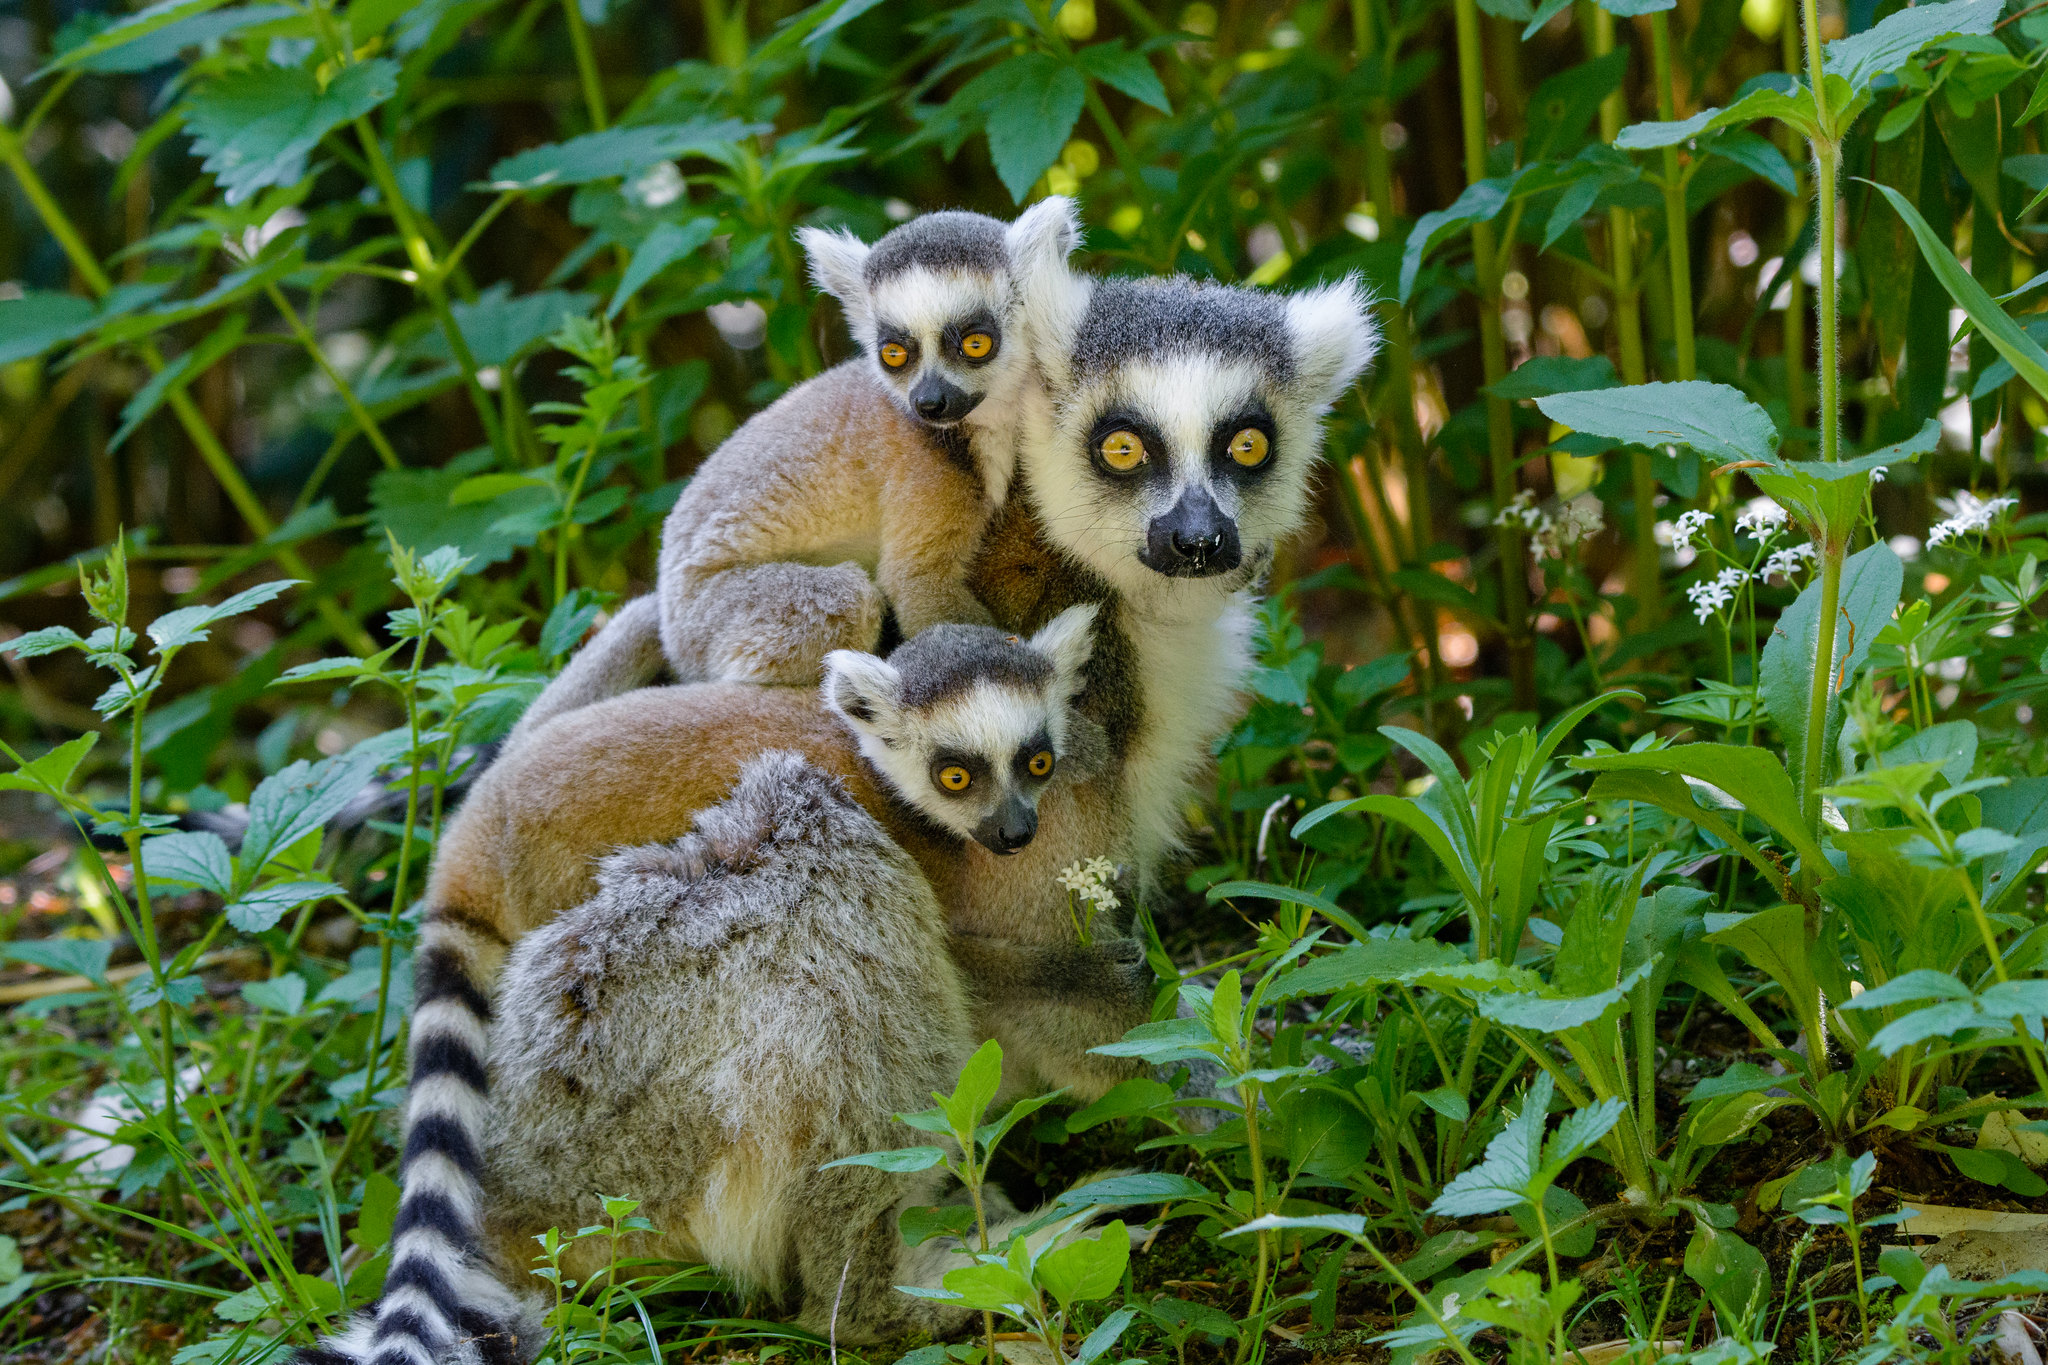 Adopt a Ring-Tailed Lemur | Symbolic Adoptions from WWF